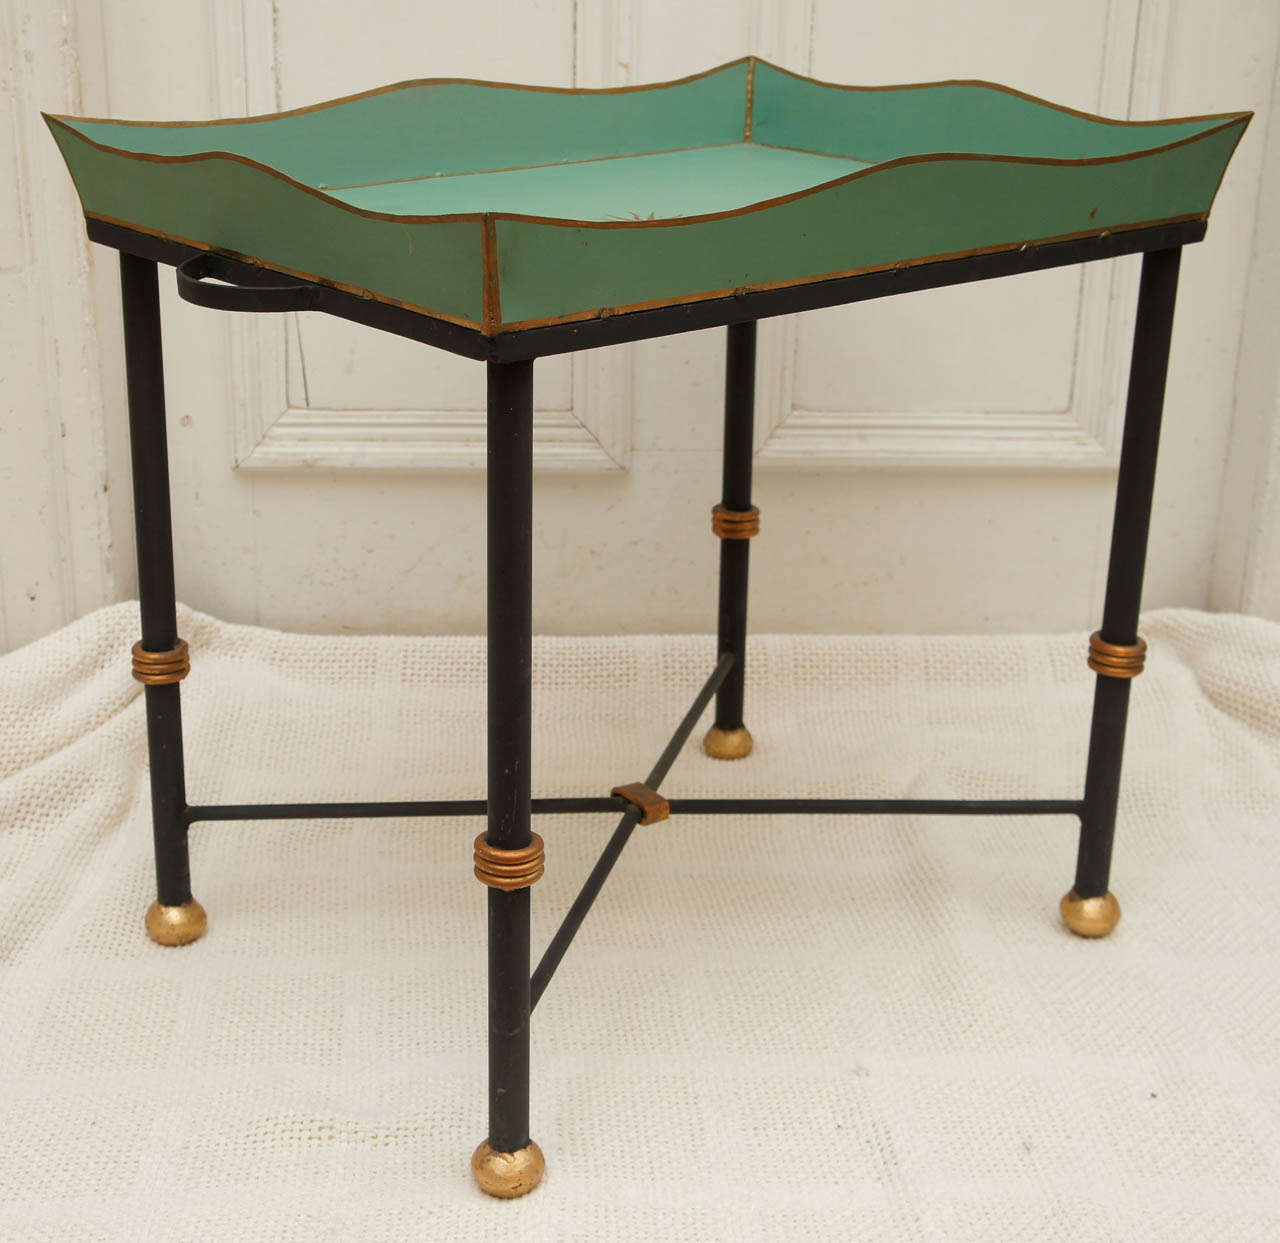 20th Century Green and Gold Decorated Tray on Cast Iron Base, Briger Design